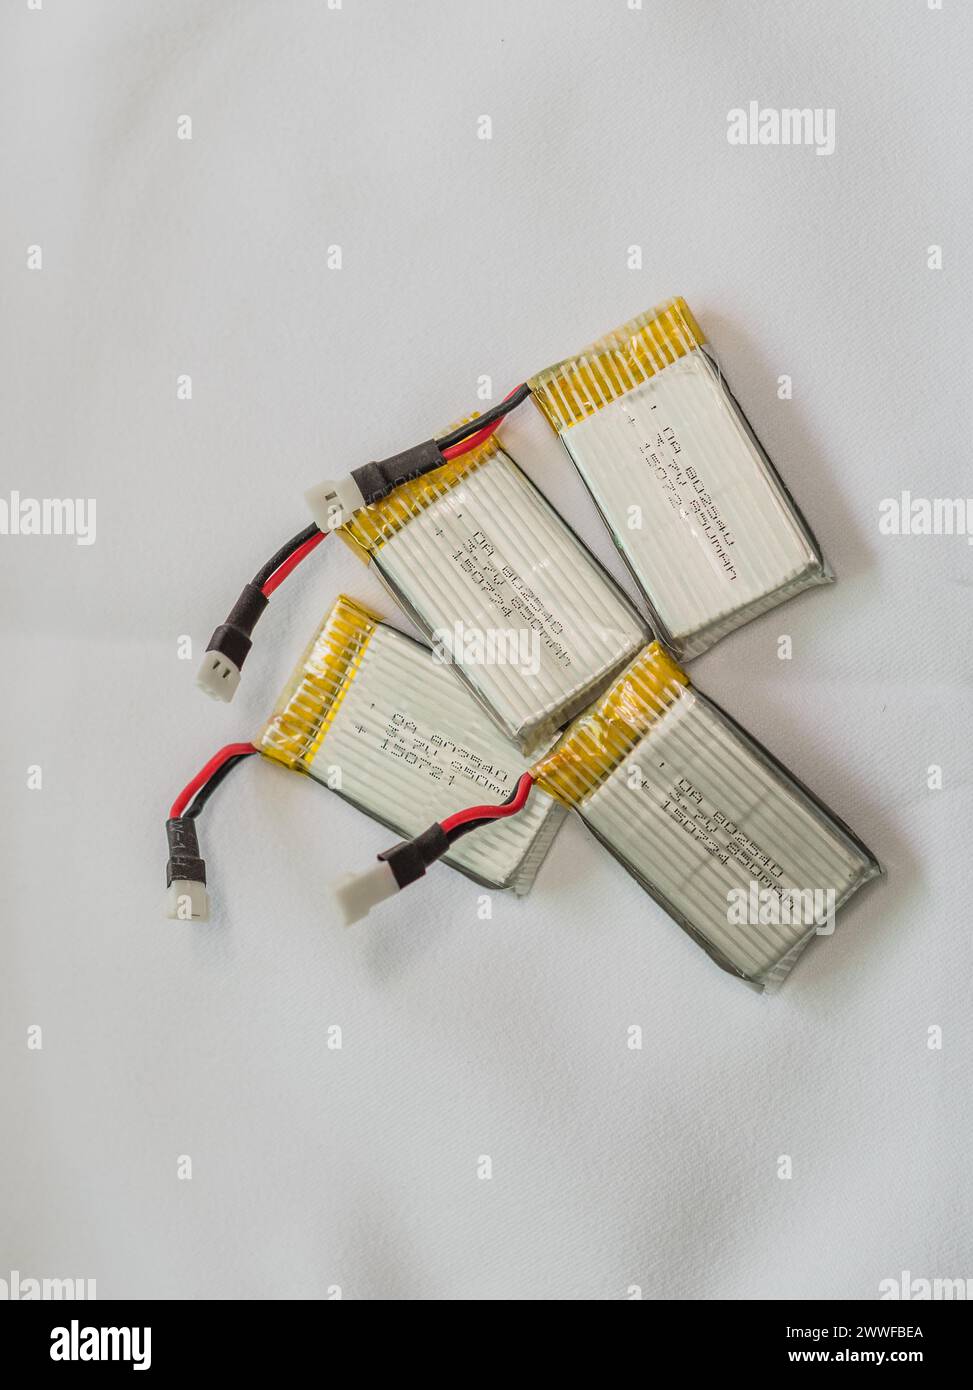 Several lithium polymer batteries with connectors and yellow tape on a white surface, in South Korea Stock Photo